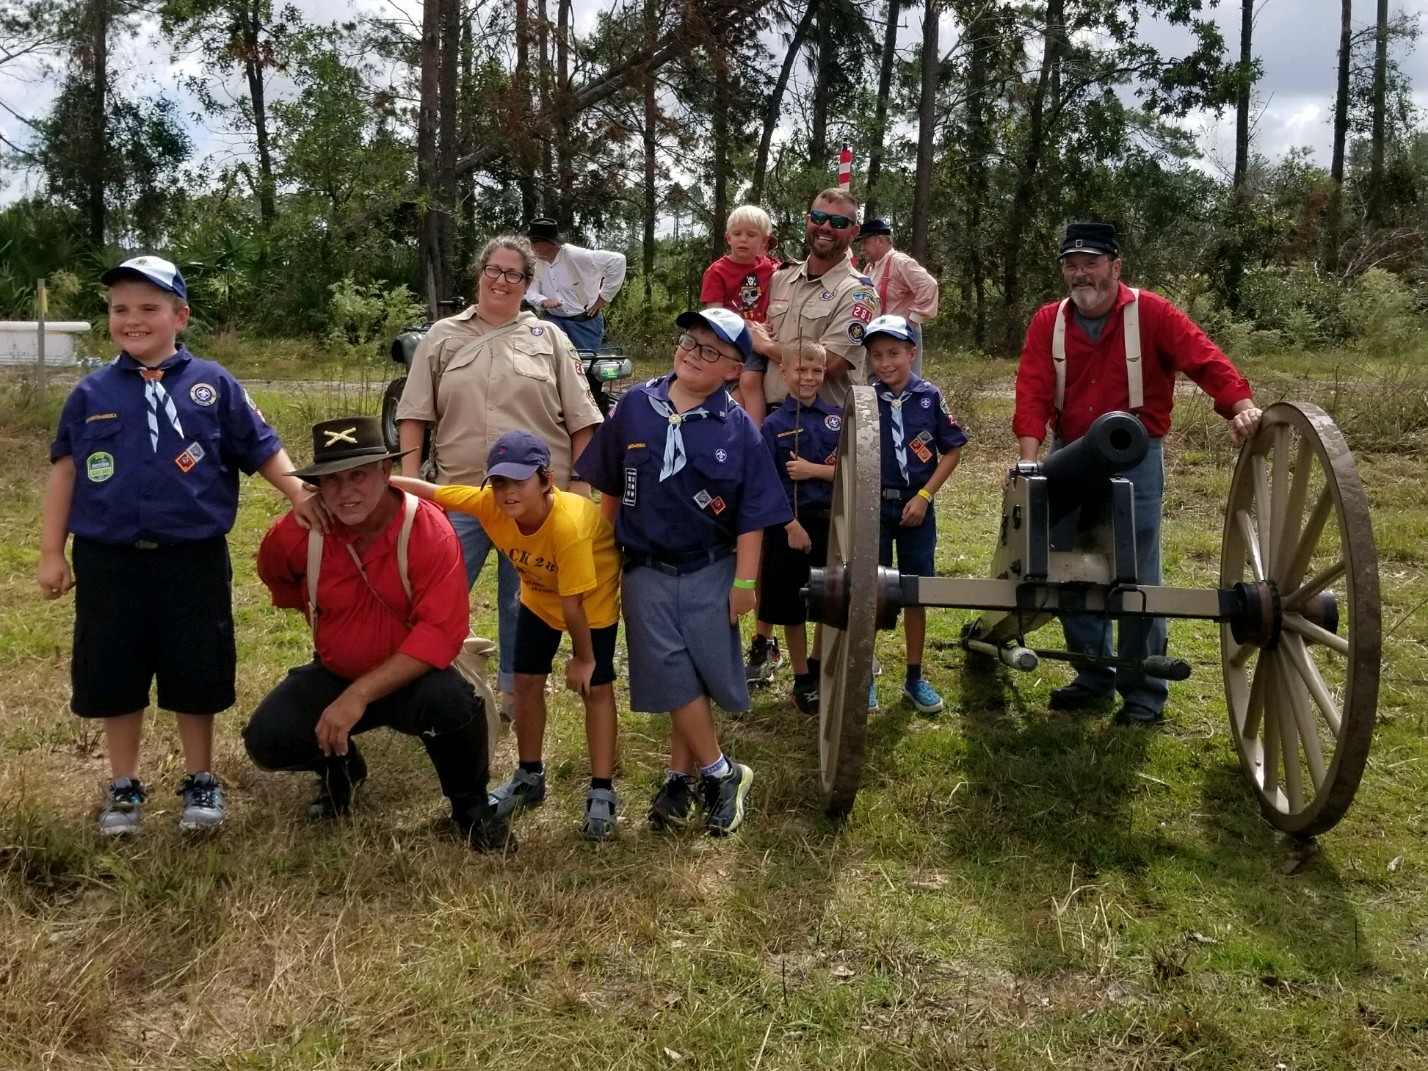 Pack 281 Bear Cub Scouts attended the Civil War Encampment and Reenactment at the Florida Agricultural Museum on Oct. 15. Photo courtesy of Amy Lynne Bowes